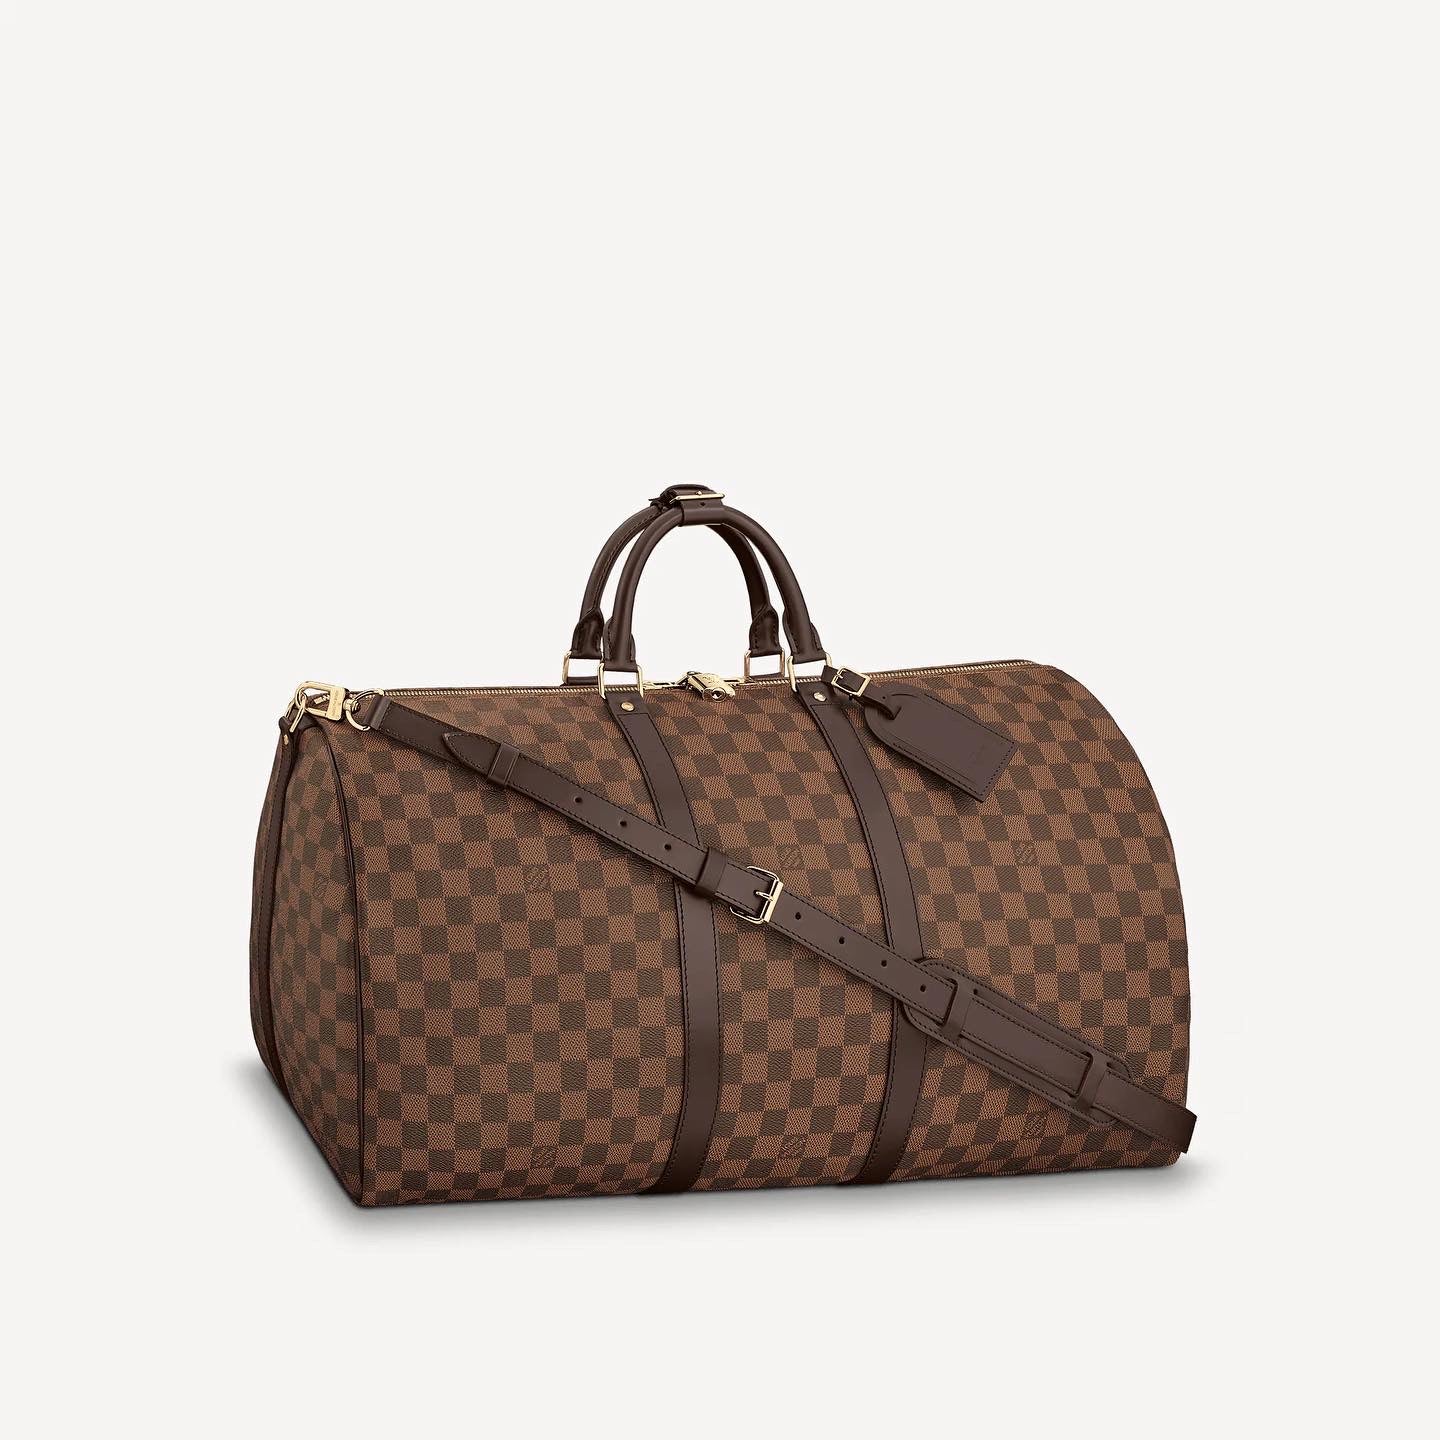 $1475 Keepall Bando 55 The ideal carry-on.